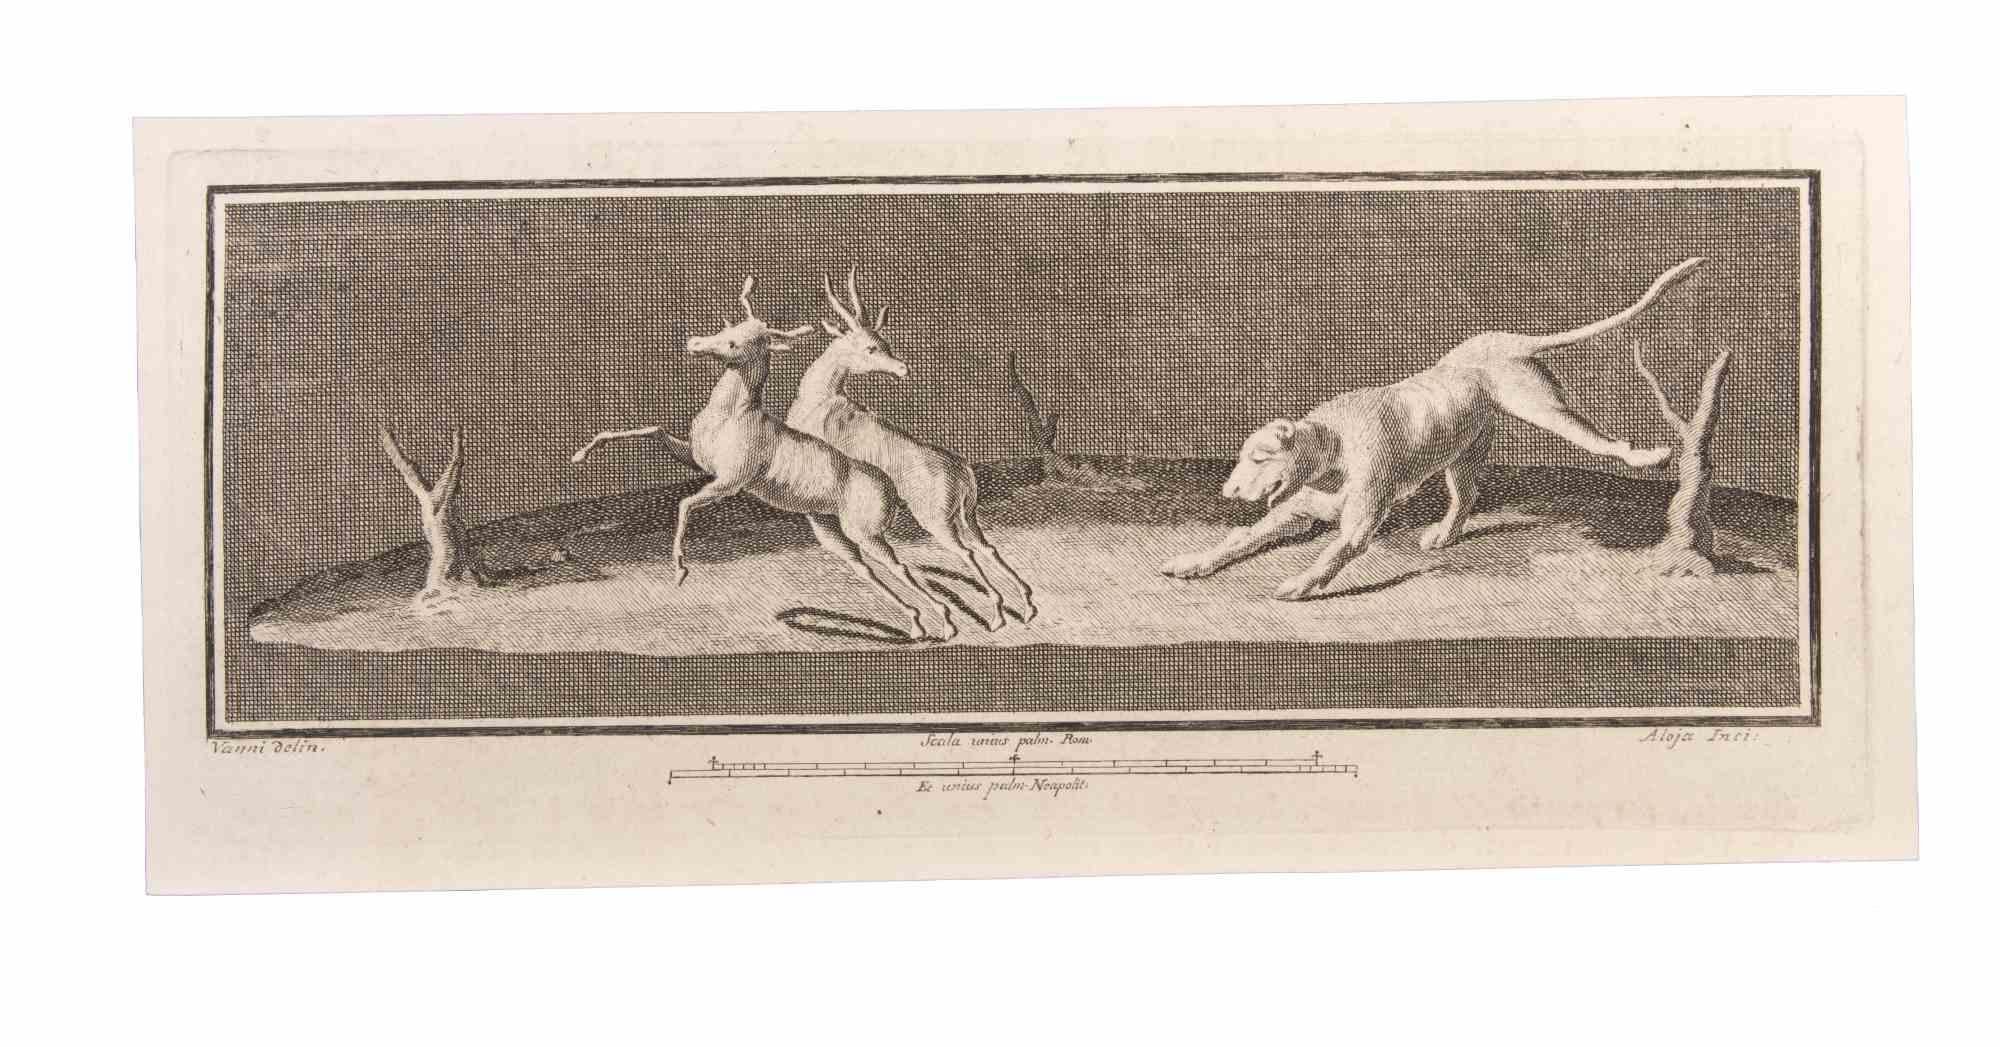 Decoration With Animals is an Etching realized by  Luigi Aloja (1783-1837).

The etching belongs to the print suite “Antiquities of Herculaneum Exposed” (original title: “Le Antichità di Ercolano Esposte”), an eight-volume volume of engravings of